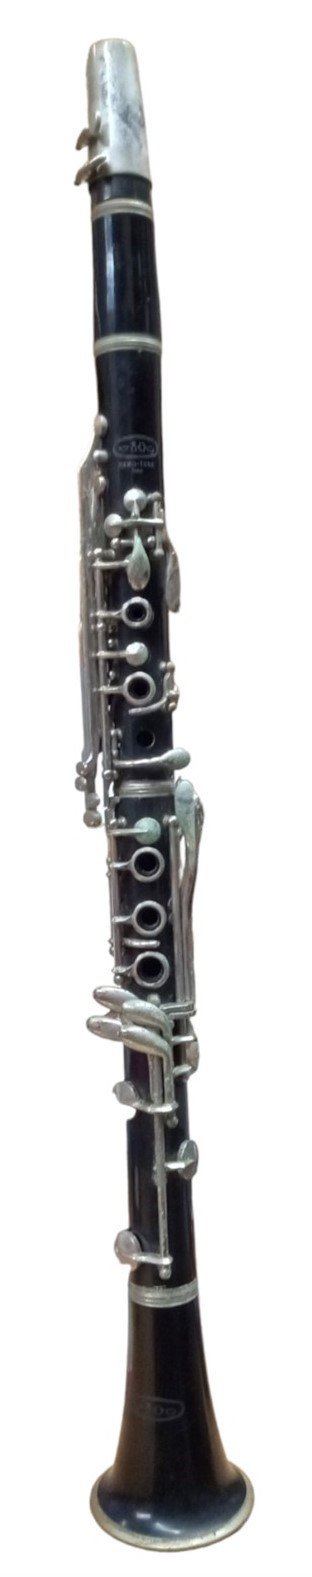 Vito Reso-Tone Clarinet Vintage Collectible Musical Instrument Woodwind